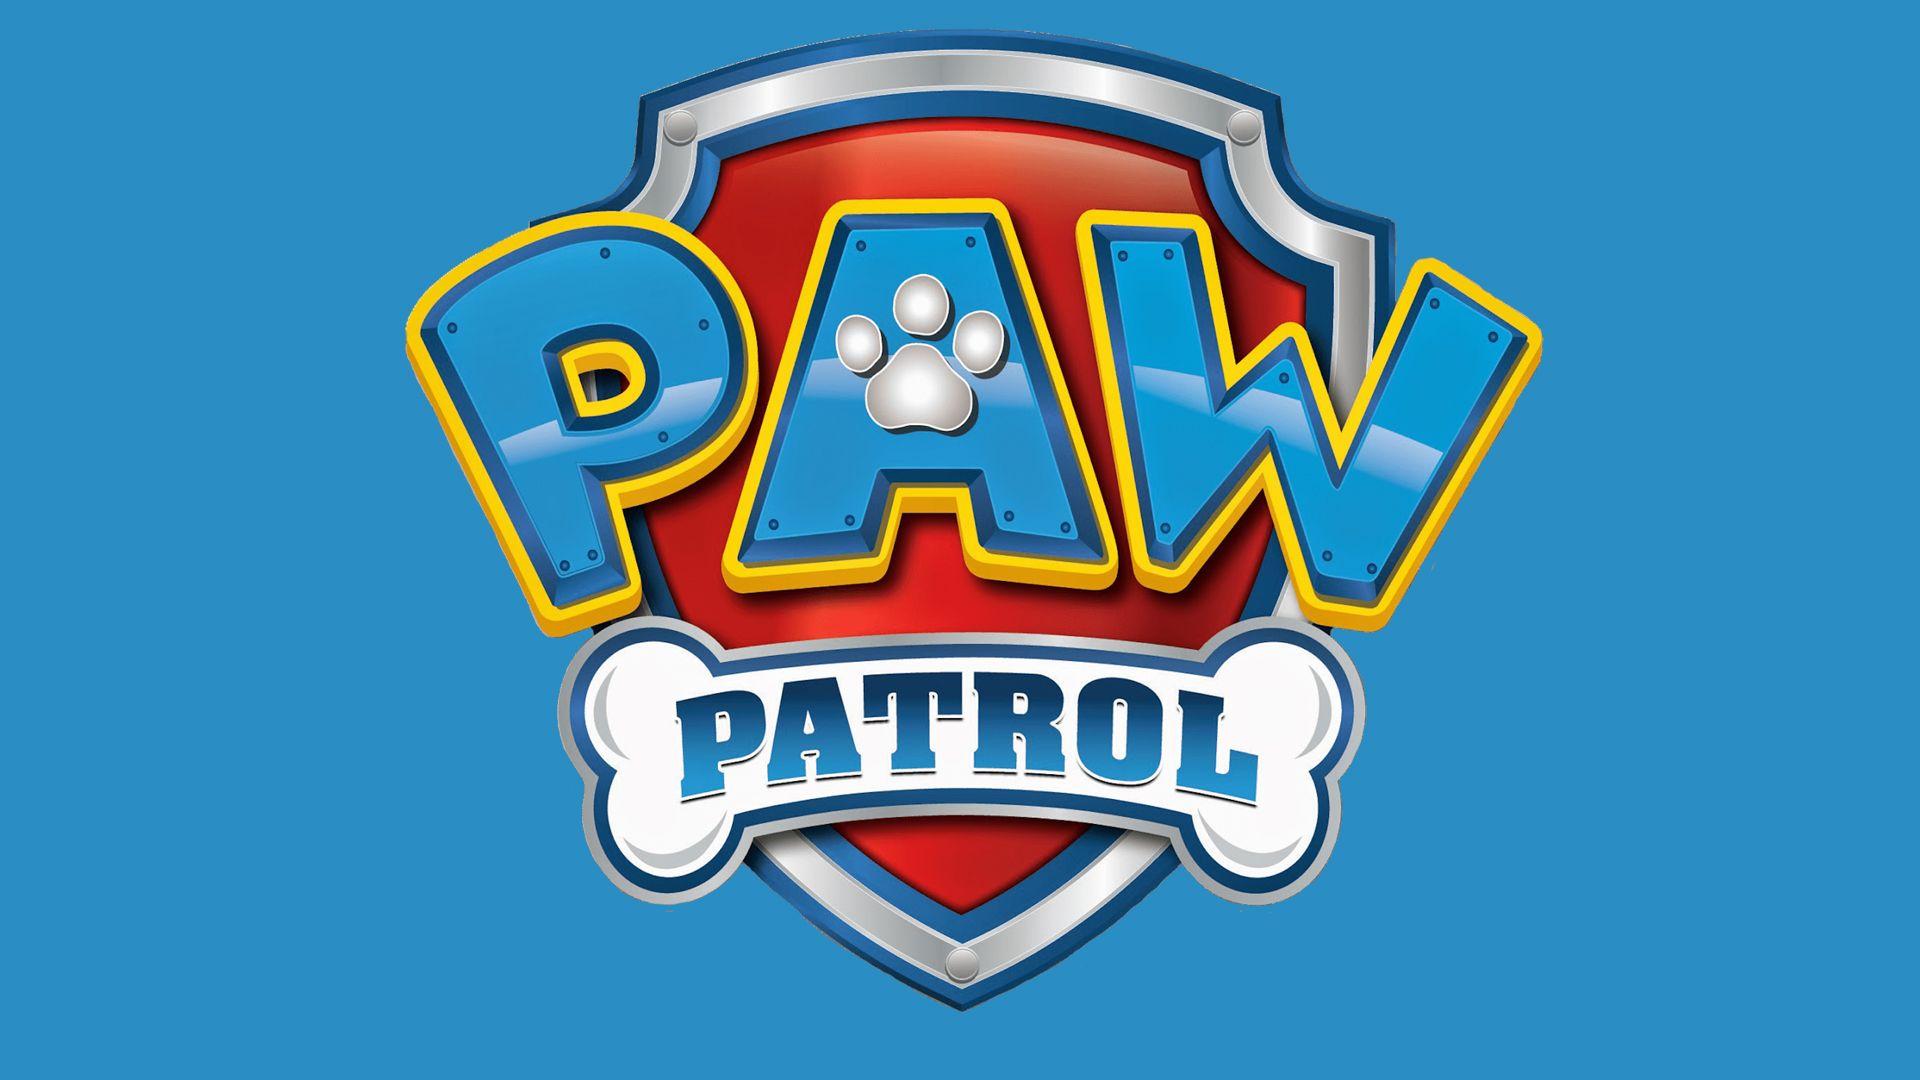 Blue Paw Patrol Logo - Paw Patrol Logo, Paw Patrol Symbol, Meaning, History and Evolution